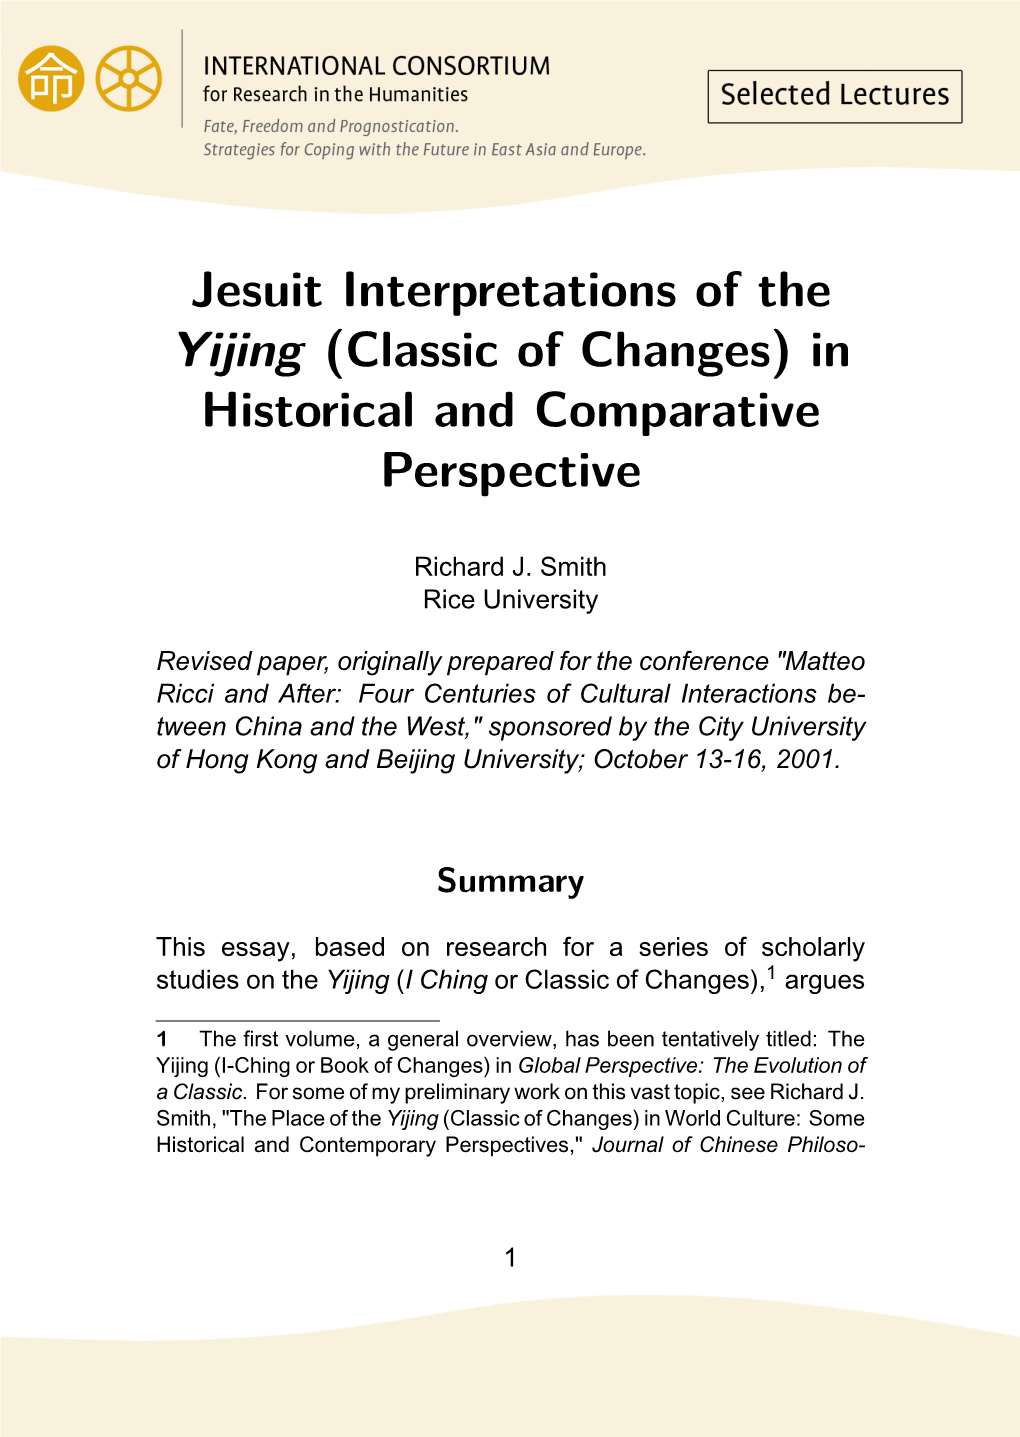 Jesuit Interpretations of the Yijing (Classic of Changes) in Historical and Comparative Perspective